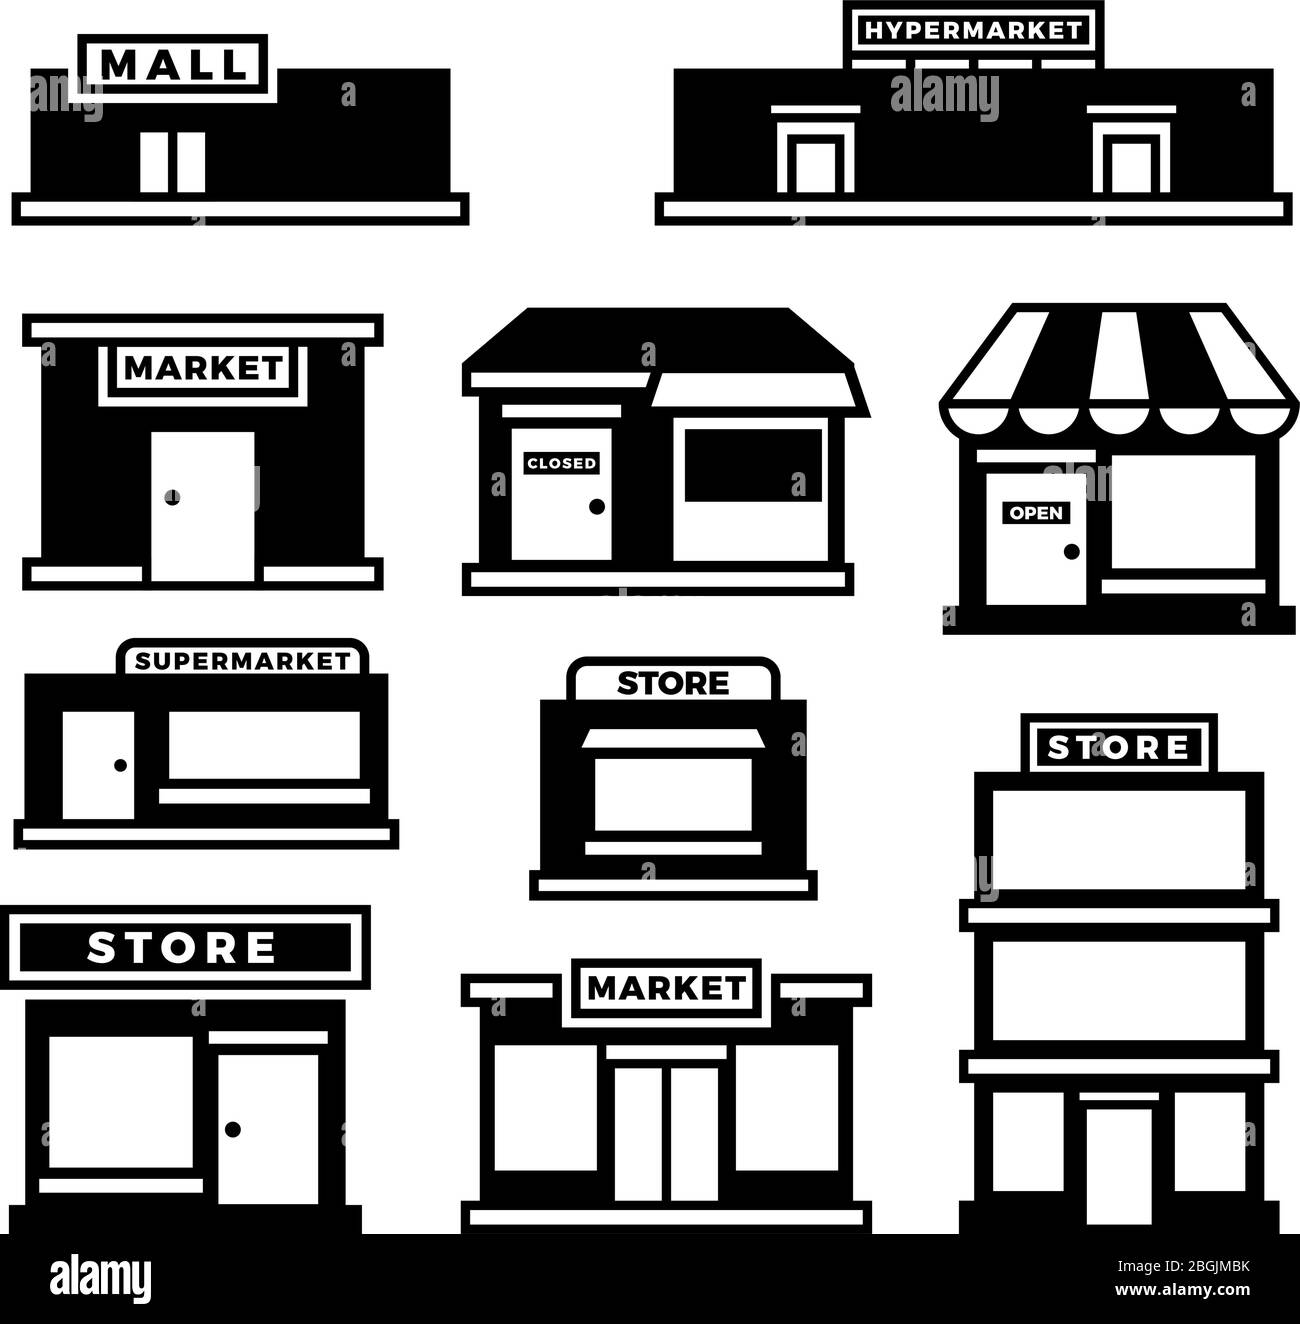 Mall and shop building icons. Shopping and retail pictograms. Supermarket, store exterior vector black symbols isolated. Monochrome building shop and store, market and retail illustration Stock Vector